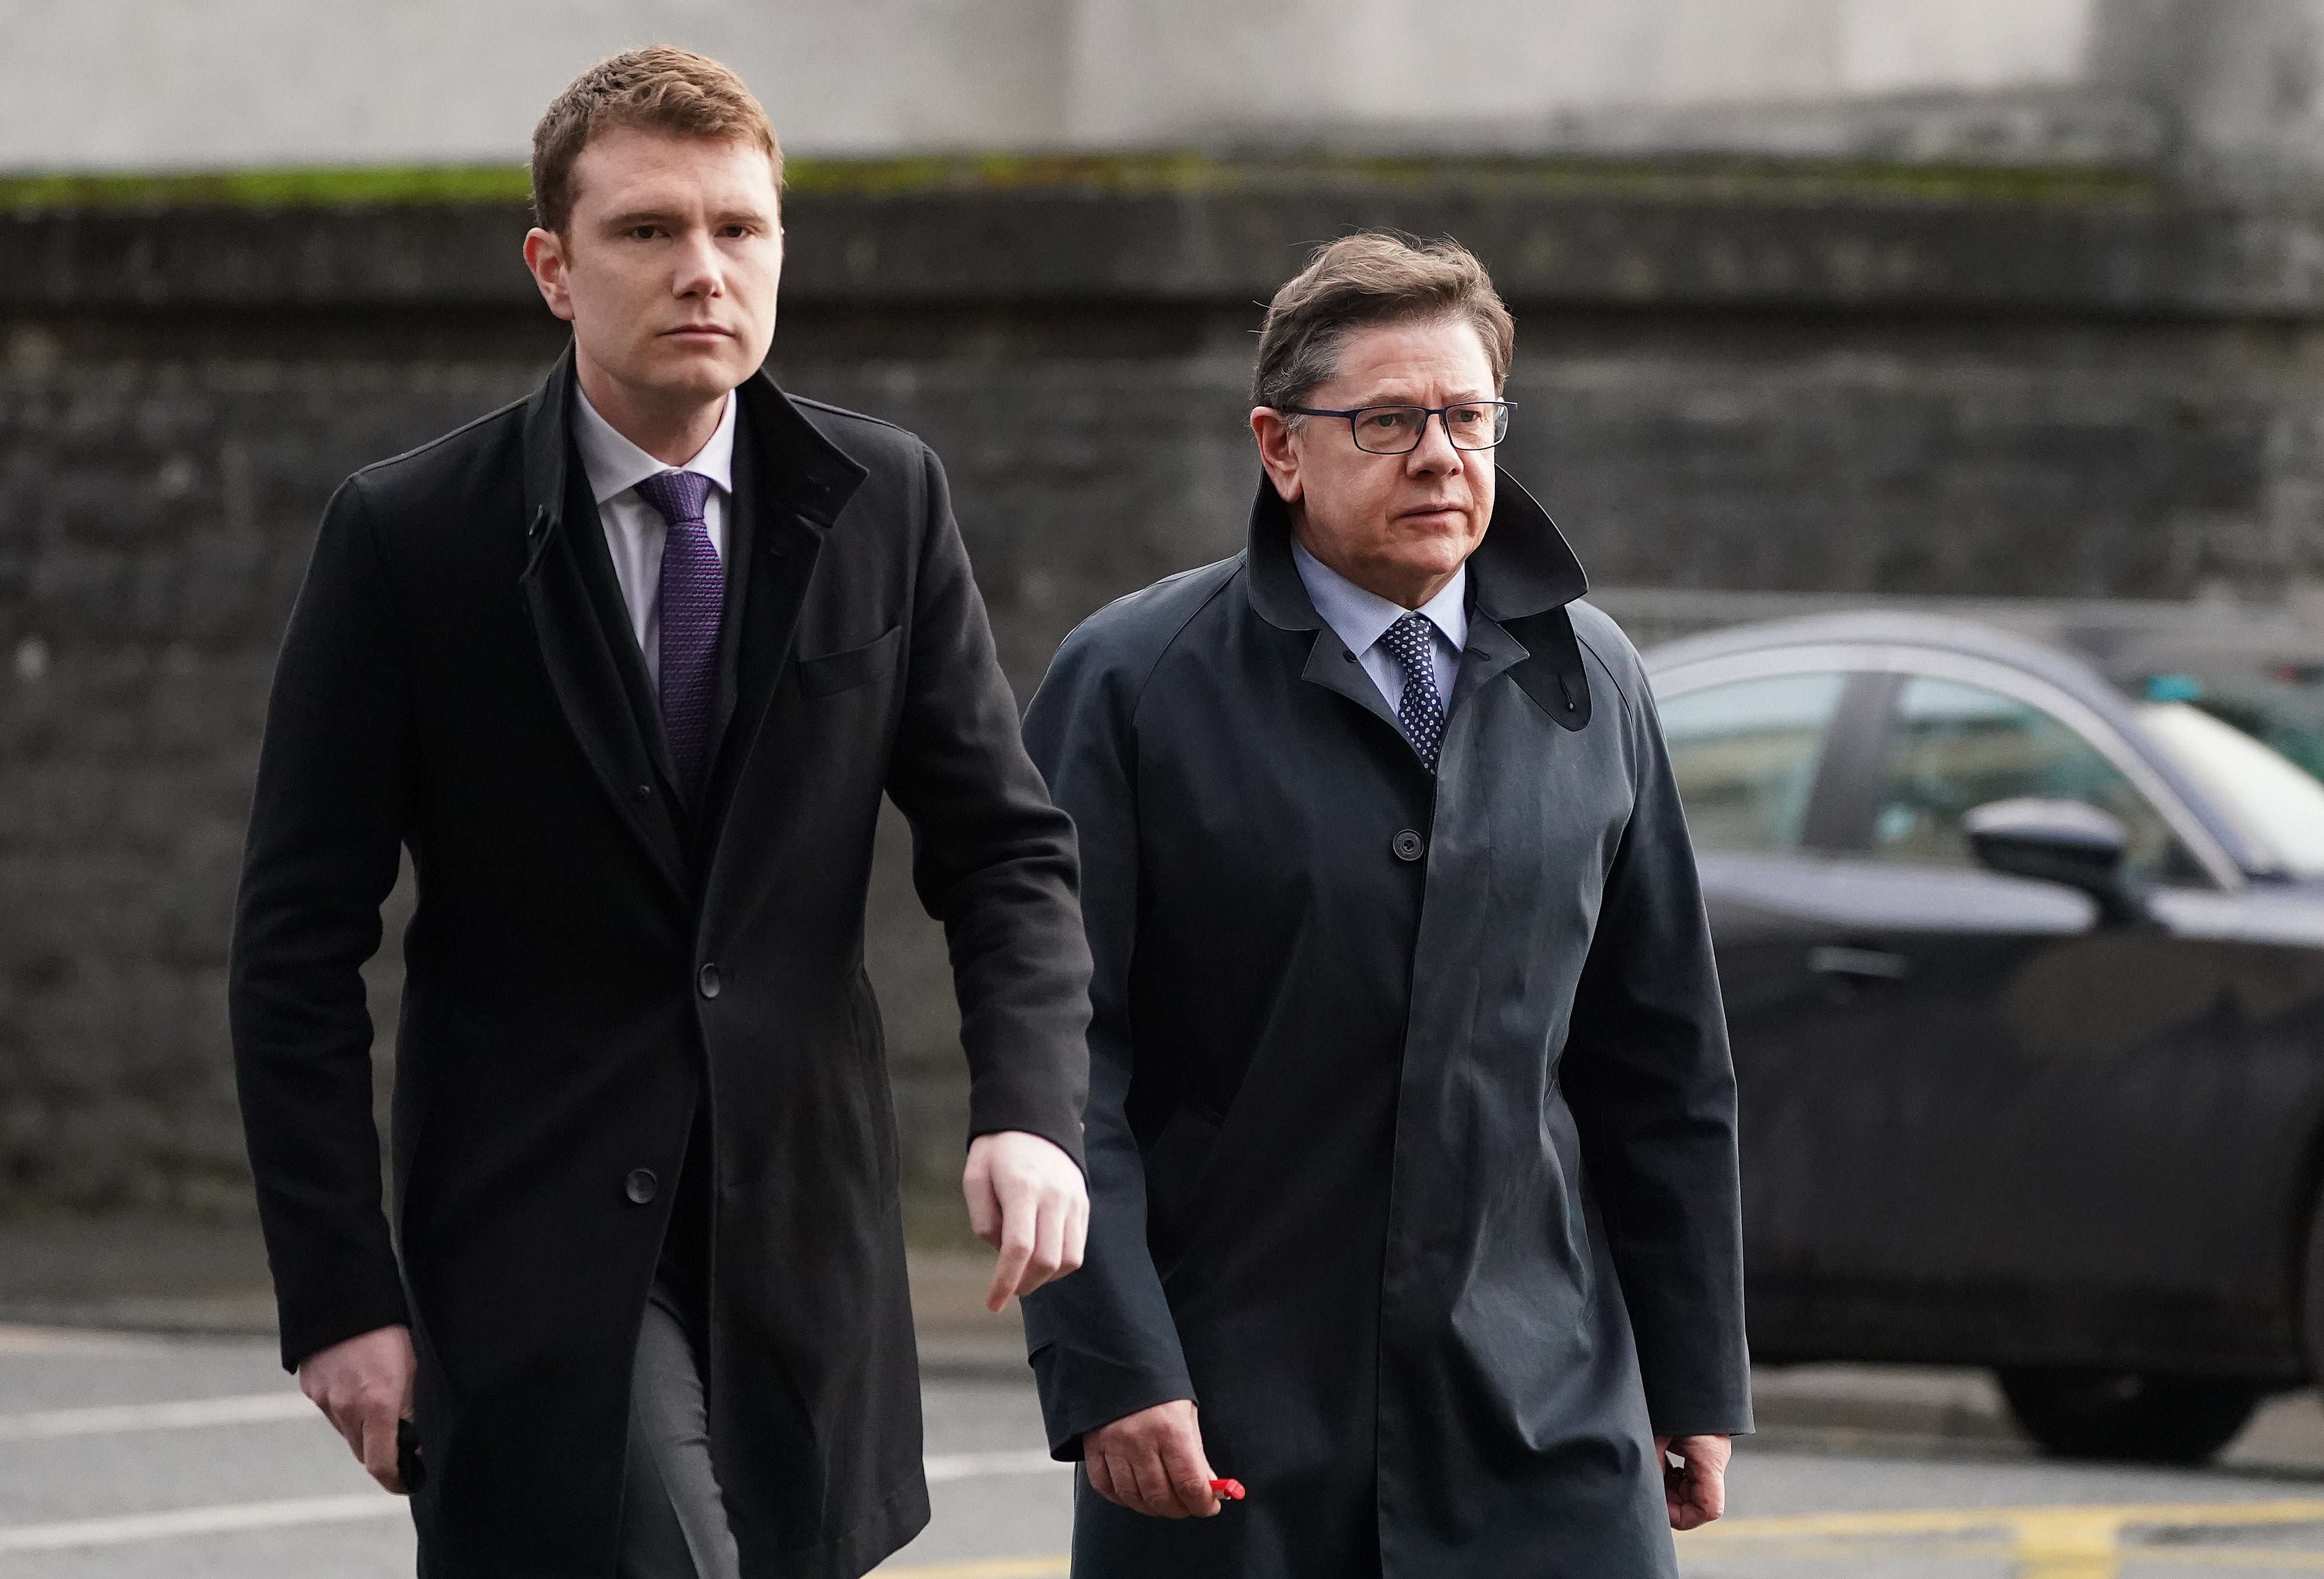 John Sweeney (right) and James Sweeney arriving at Galway court (PA)